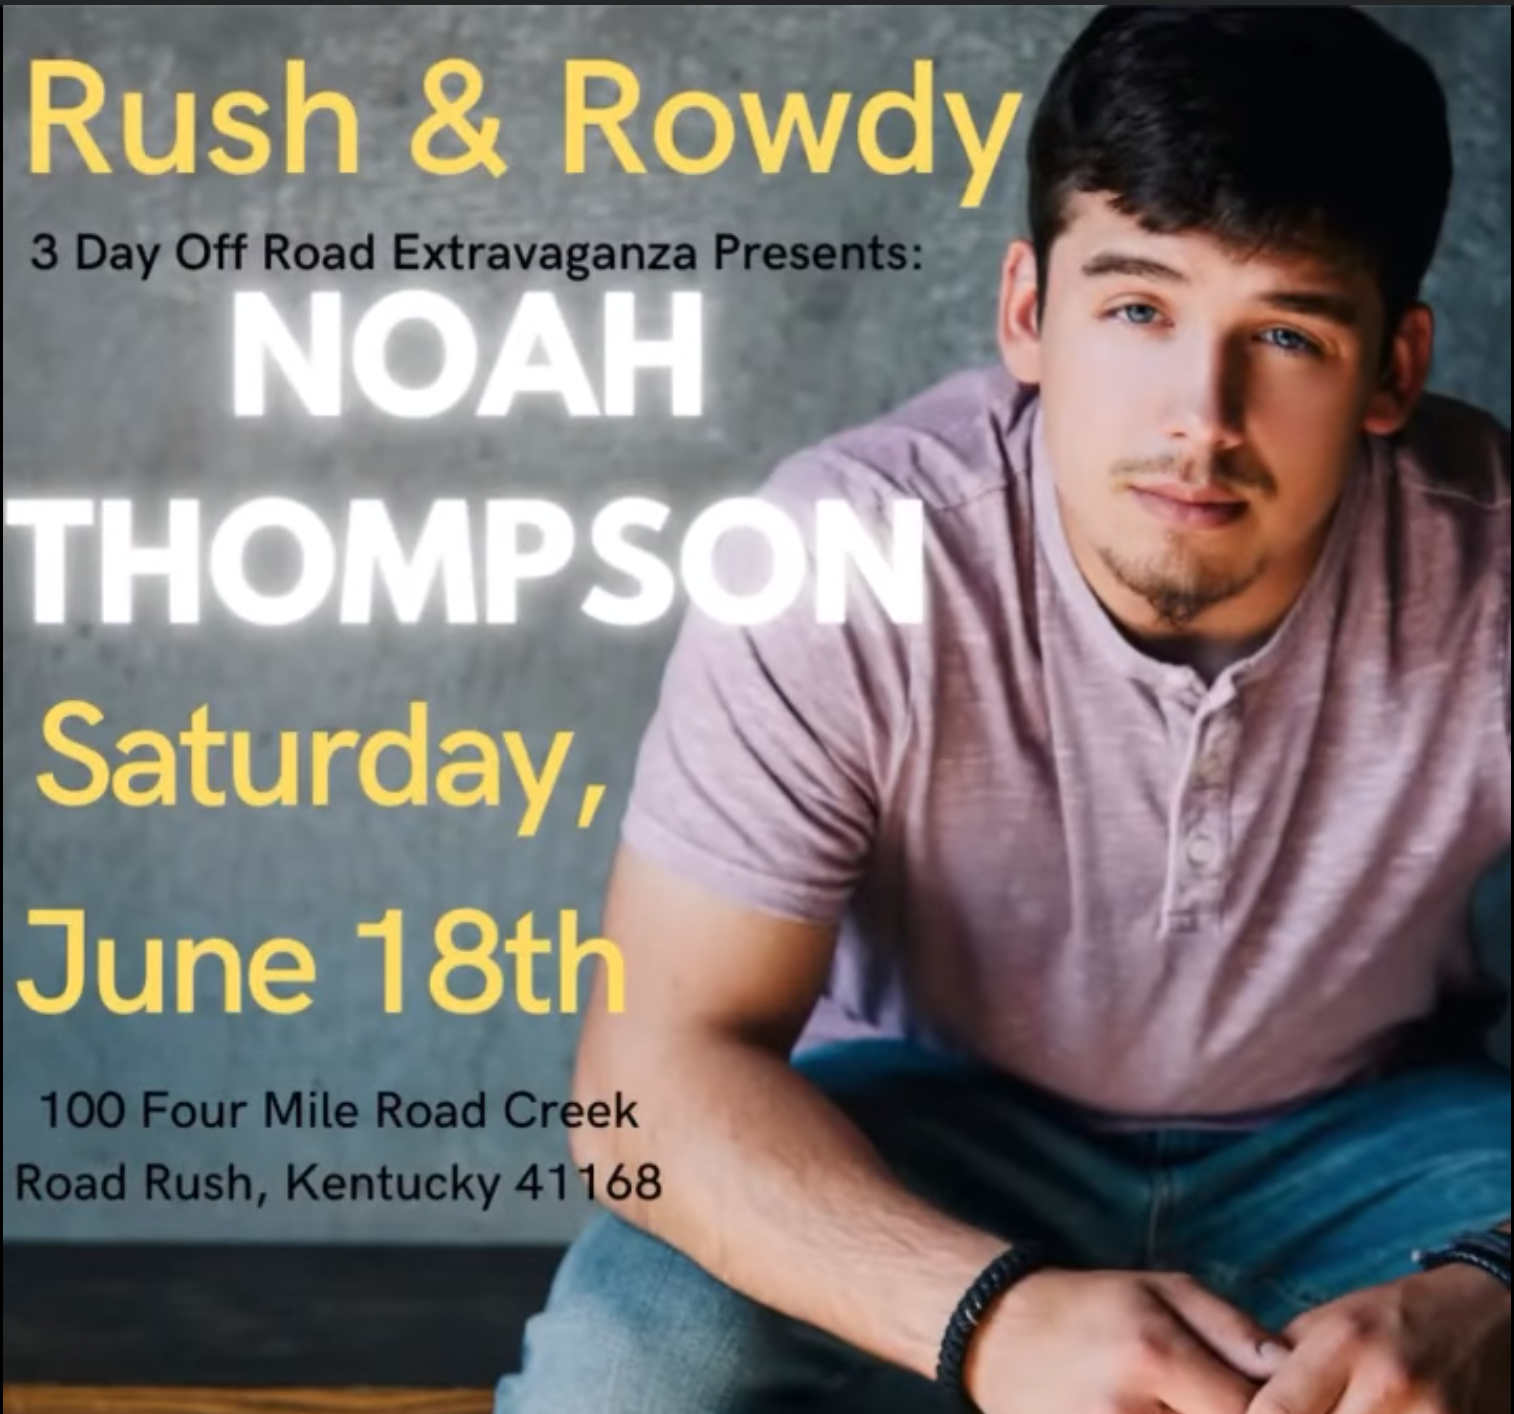 Noah Thompson Rush  Rowdy 3 Day Off Road Extravaganza Concert  Events